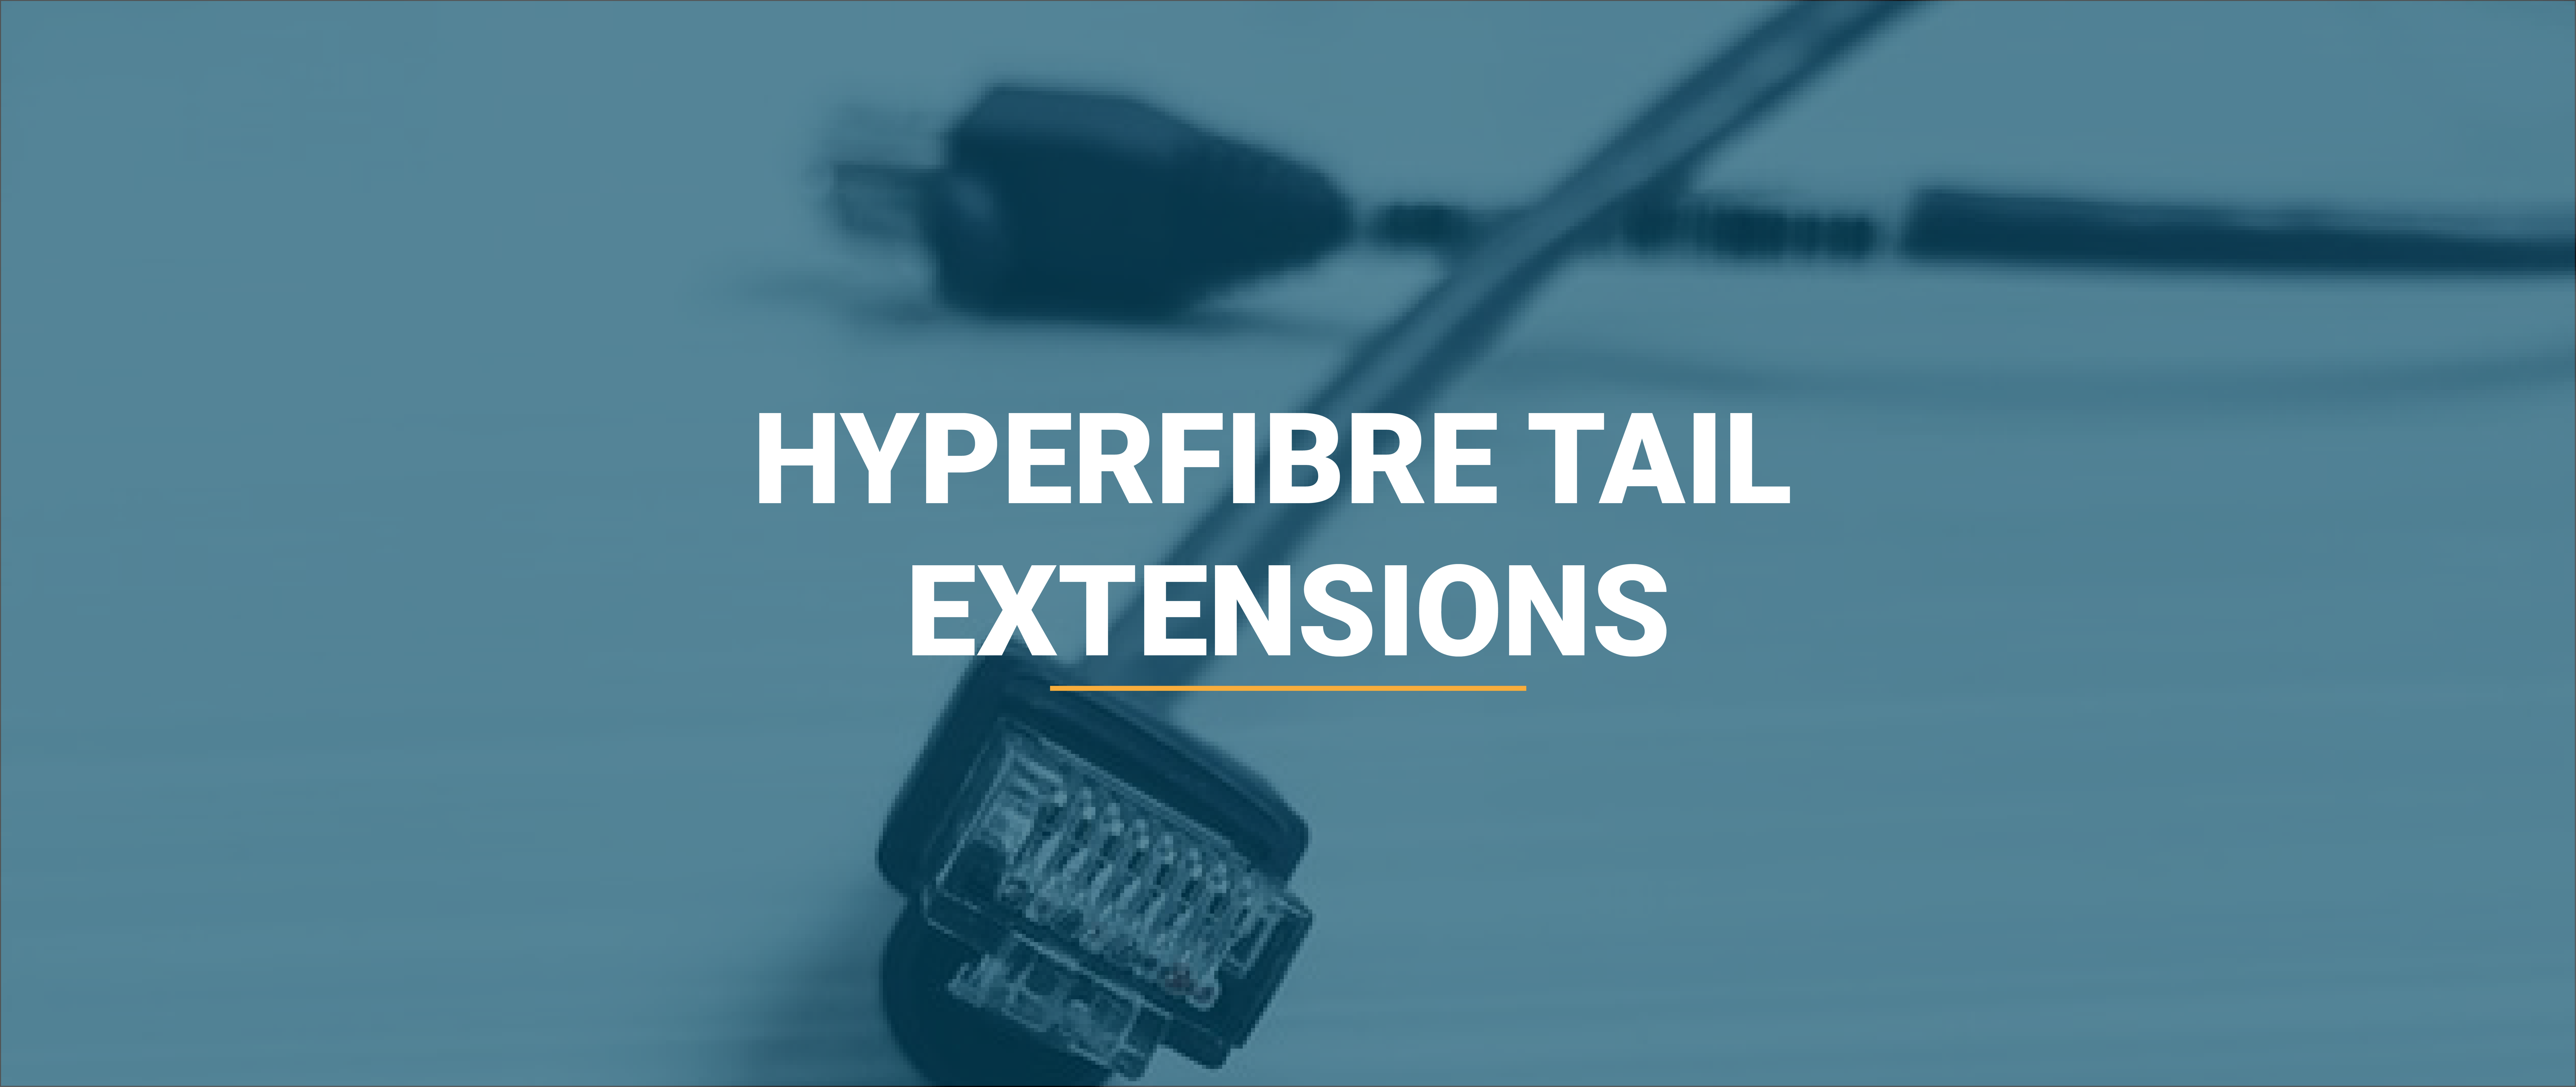 blog cover hyperfibre tail extensions 01